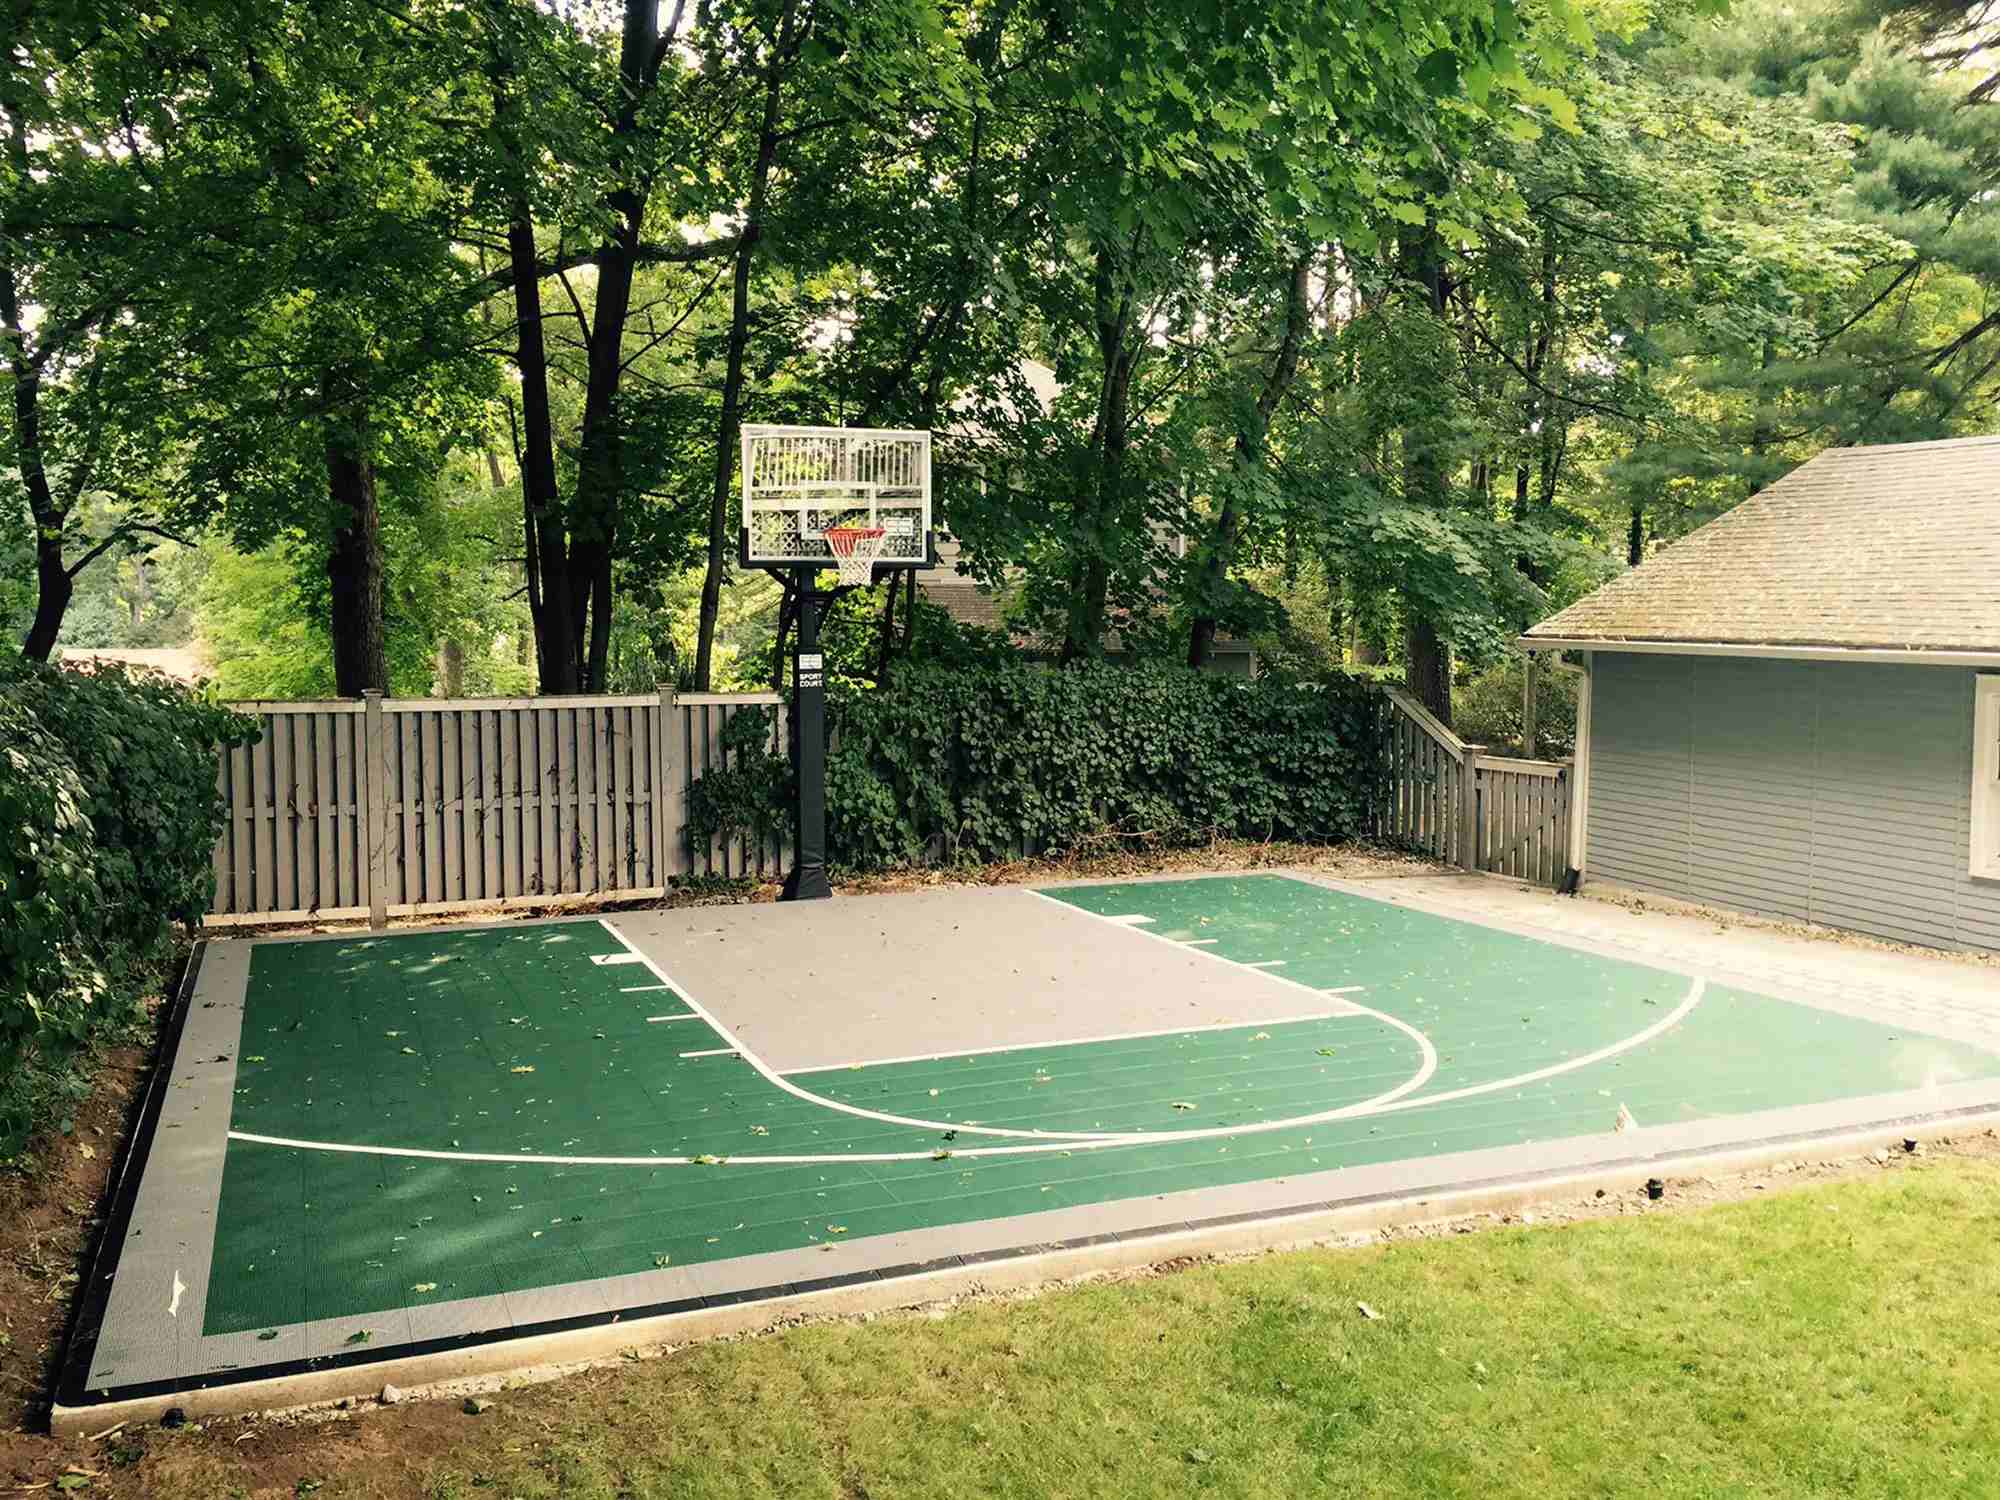 How To Make Basketball Court In Backyard